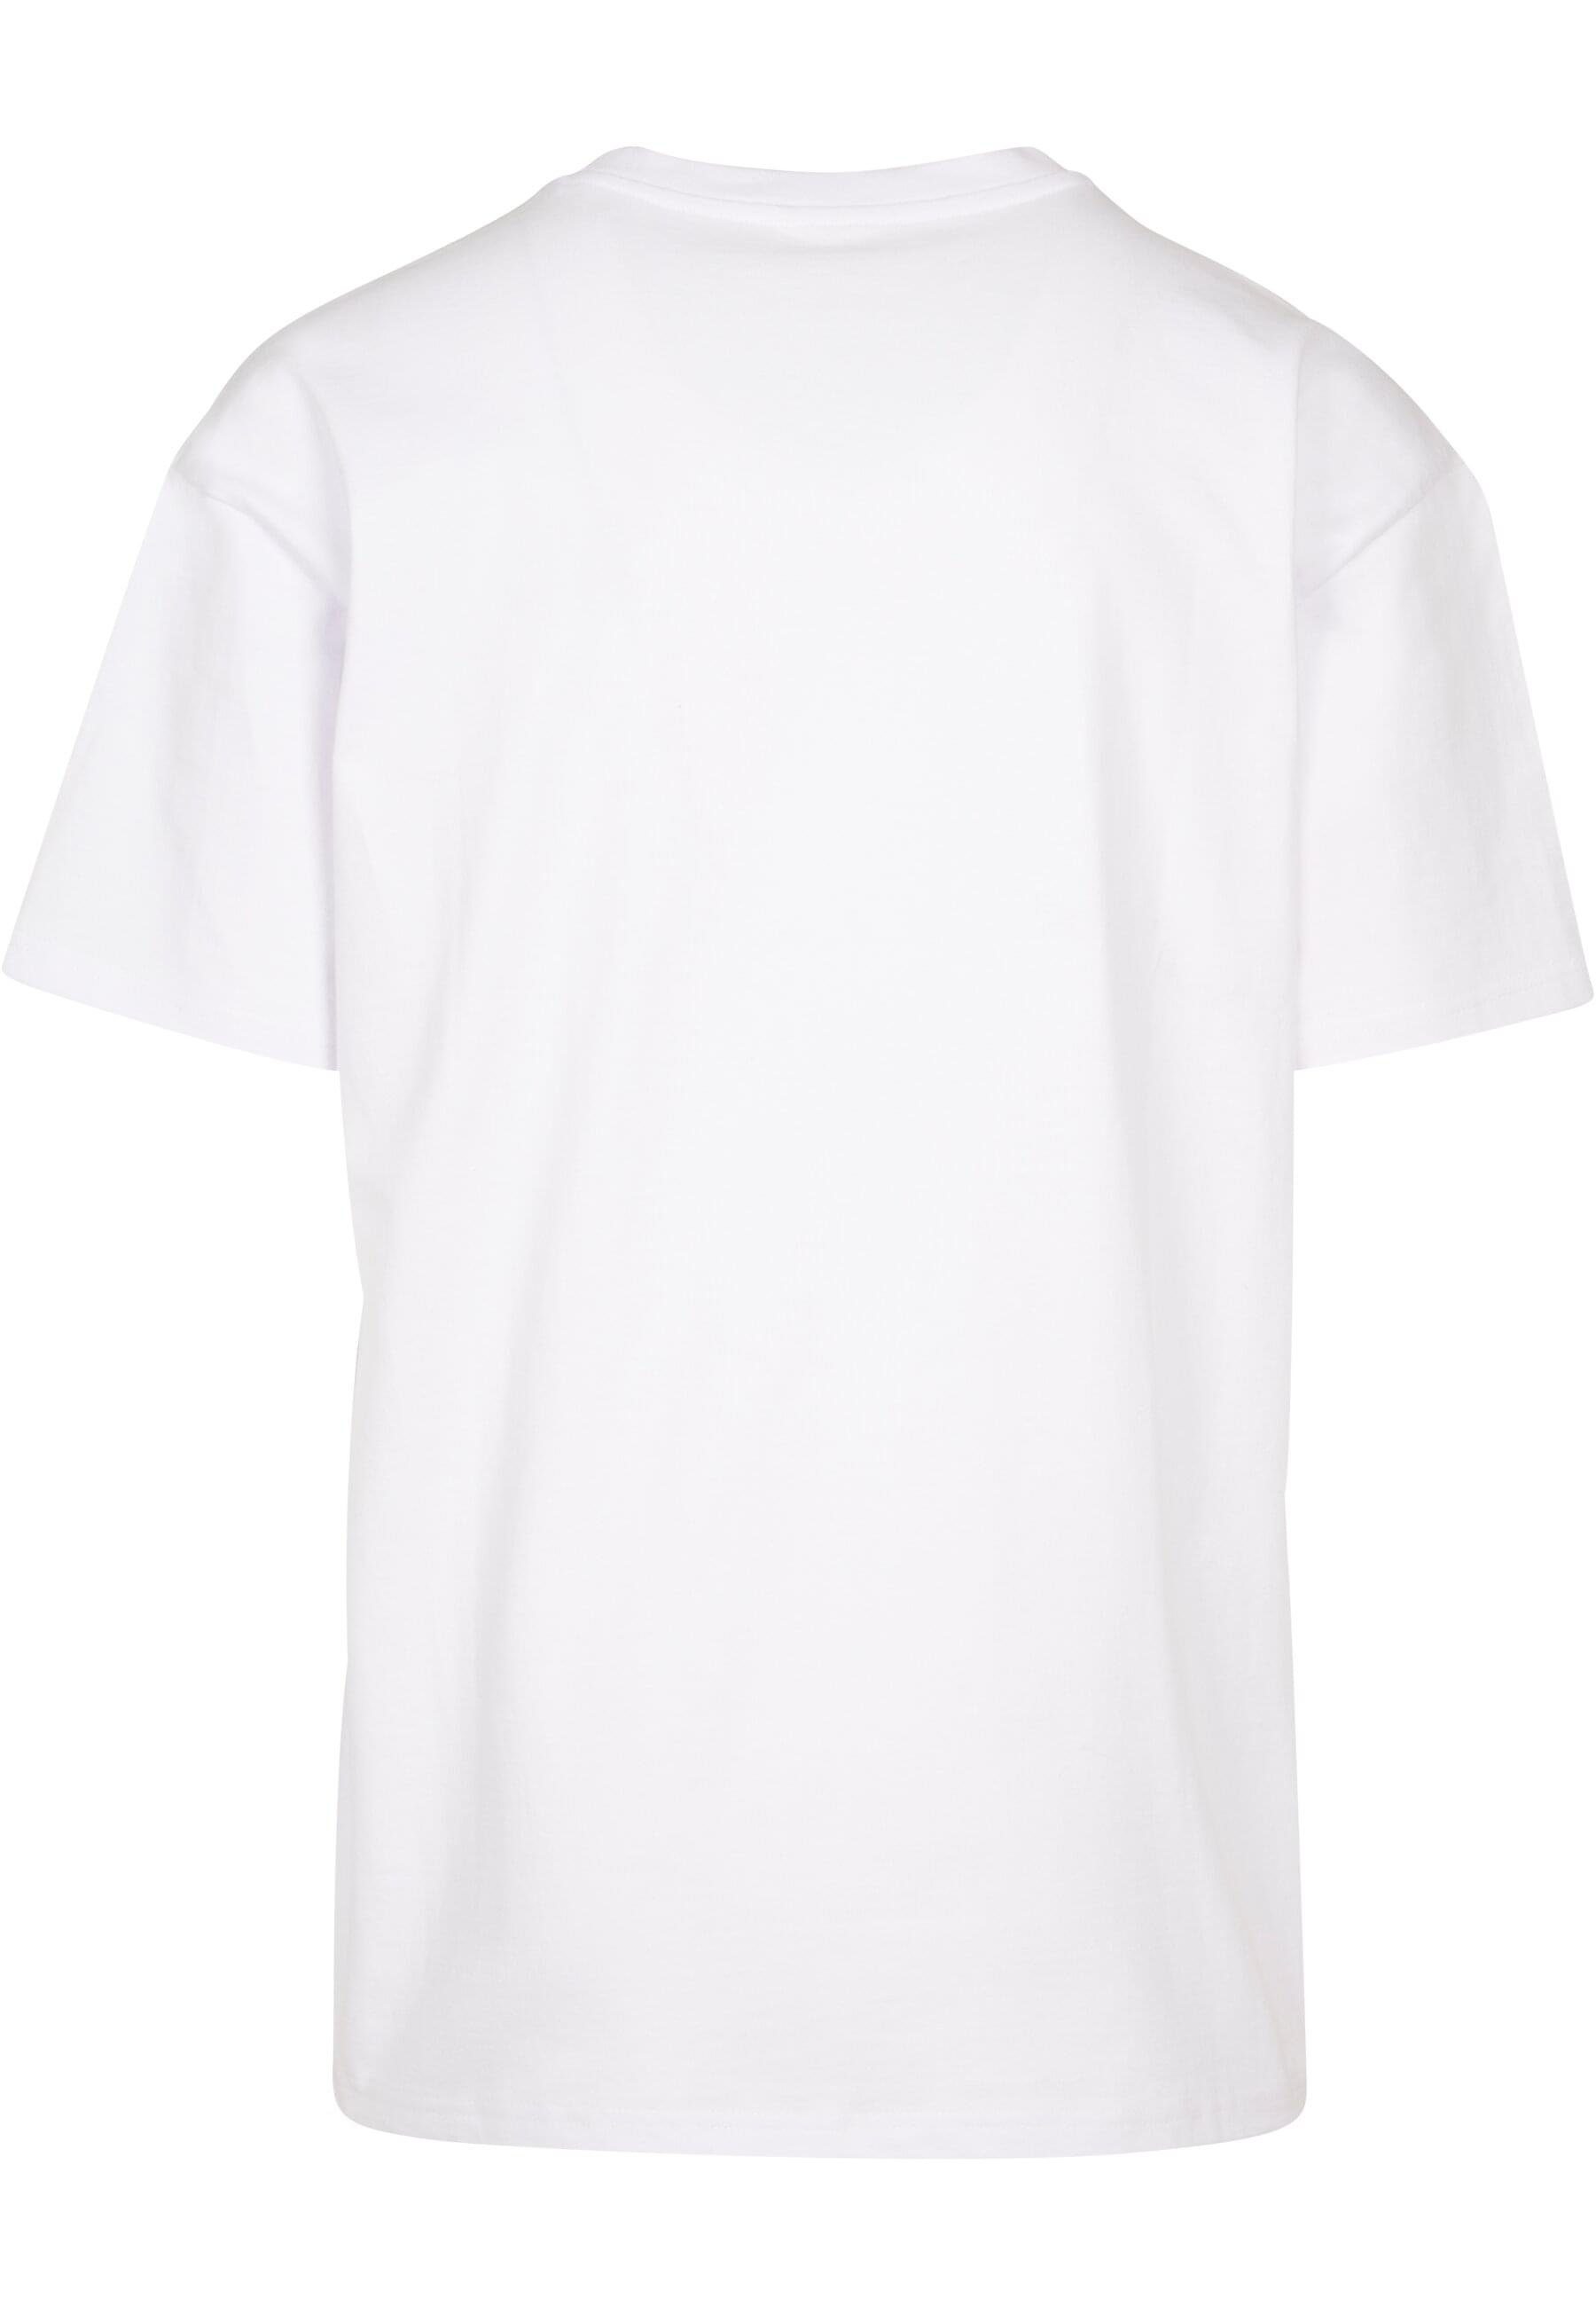 Upscale by fly Mister (1-tlg) Ready white to Oversize Tee T-Shirt Tee Unisex